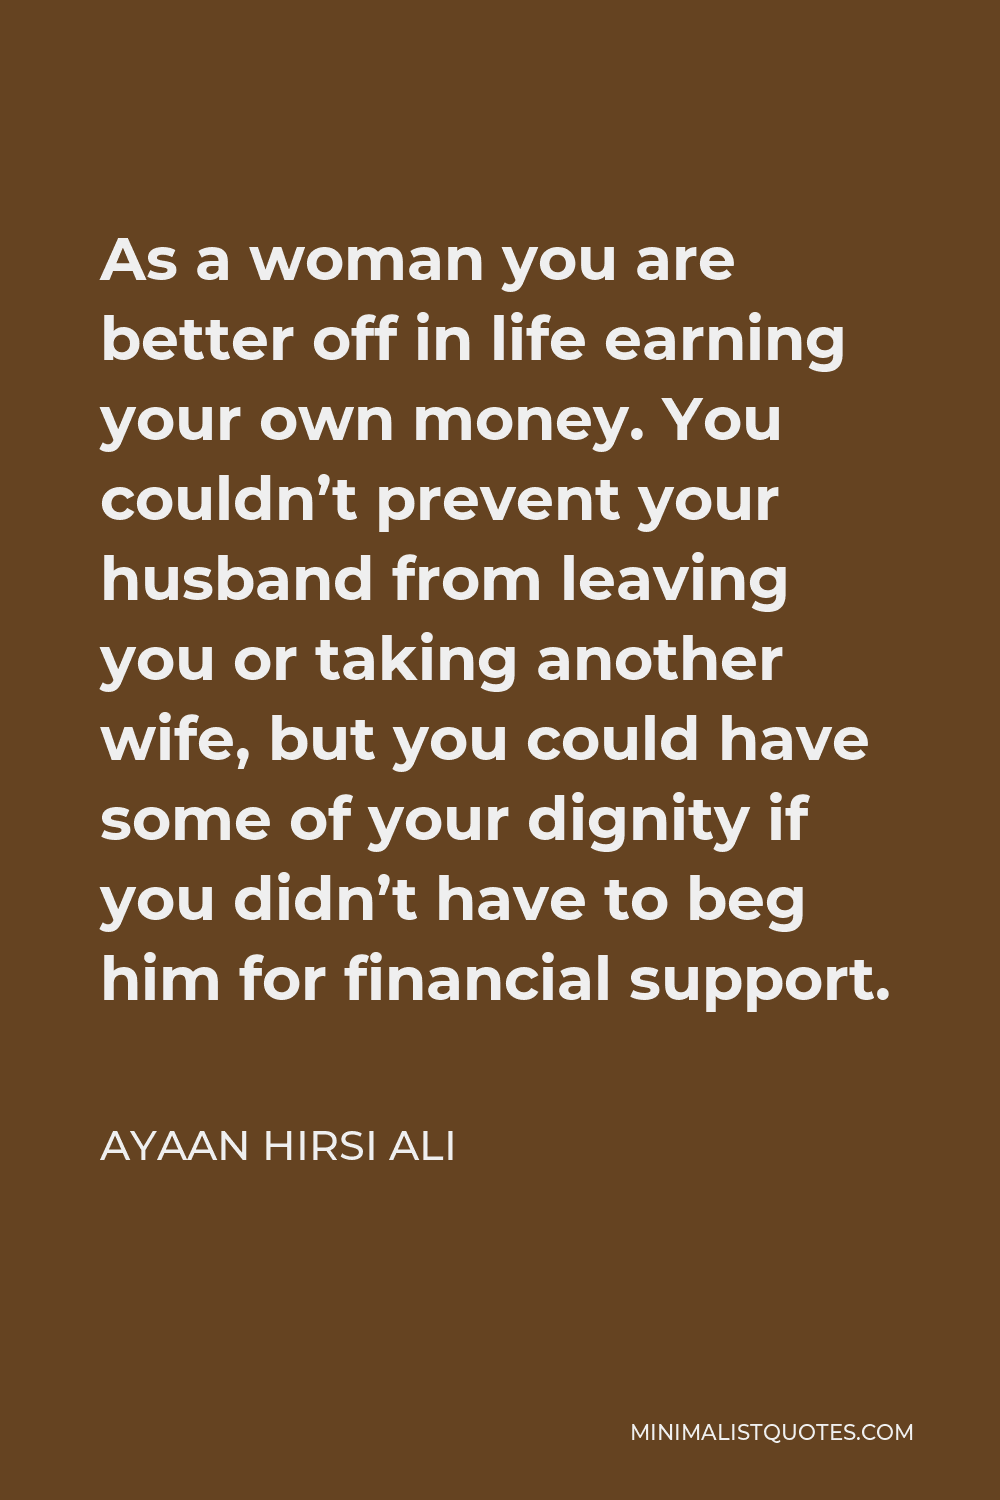 Ayaan Hirsi Ali Quote - As a woman you are better off in life earning your own money. You couldn’t prevent your husband from leaving you or taking another wife, but you could have some of your dignity if you didn’t have to beg him for financial support.